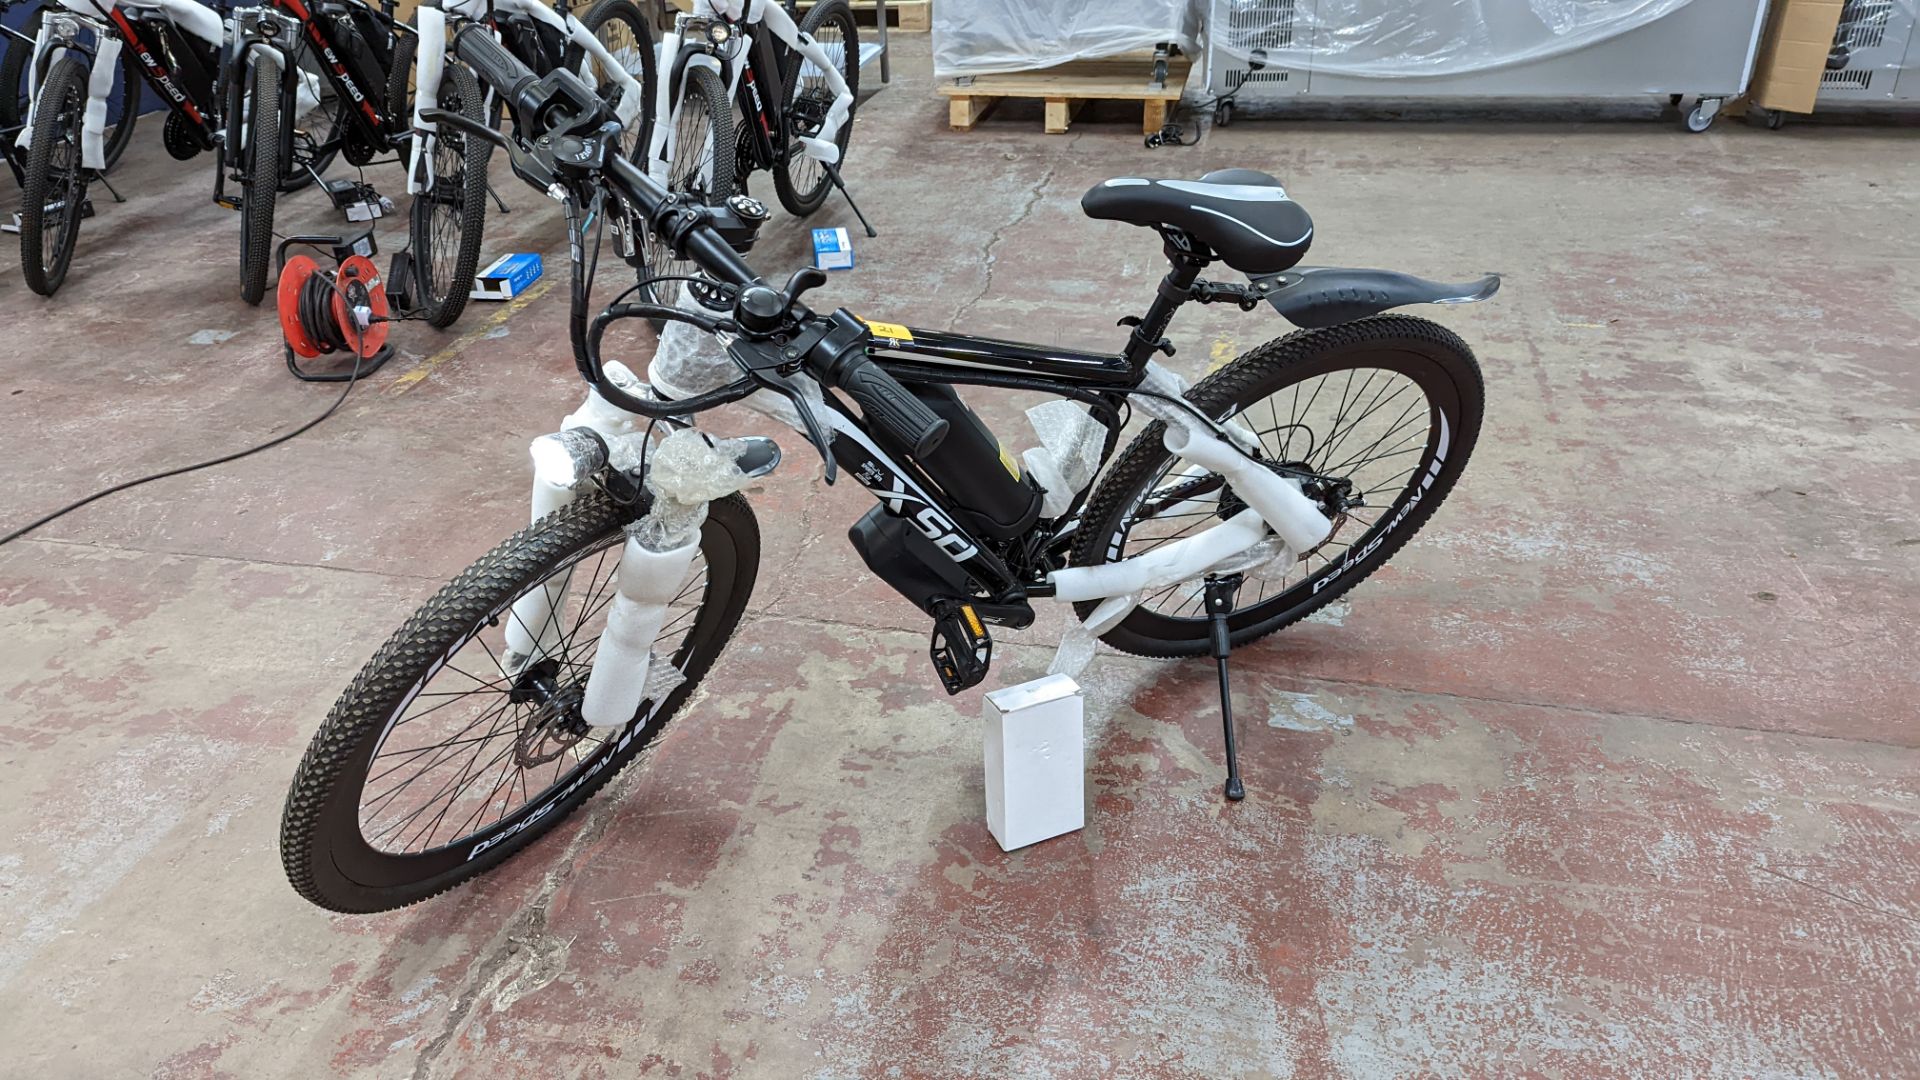 XSD FTX Sport MTB 7.5 Racing electric bike with Shimano Tourney TZ gears. Includes 36v 12AH battery, - Image 2 of 26